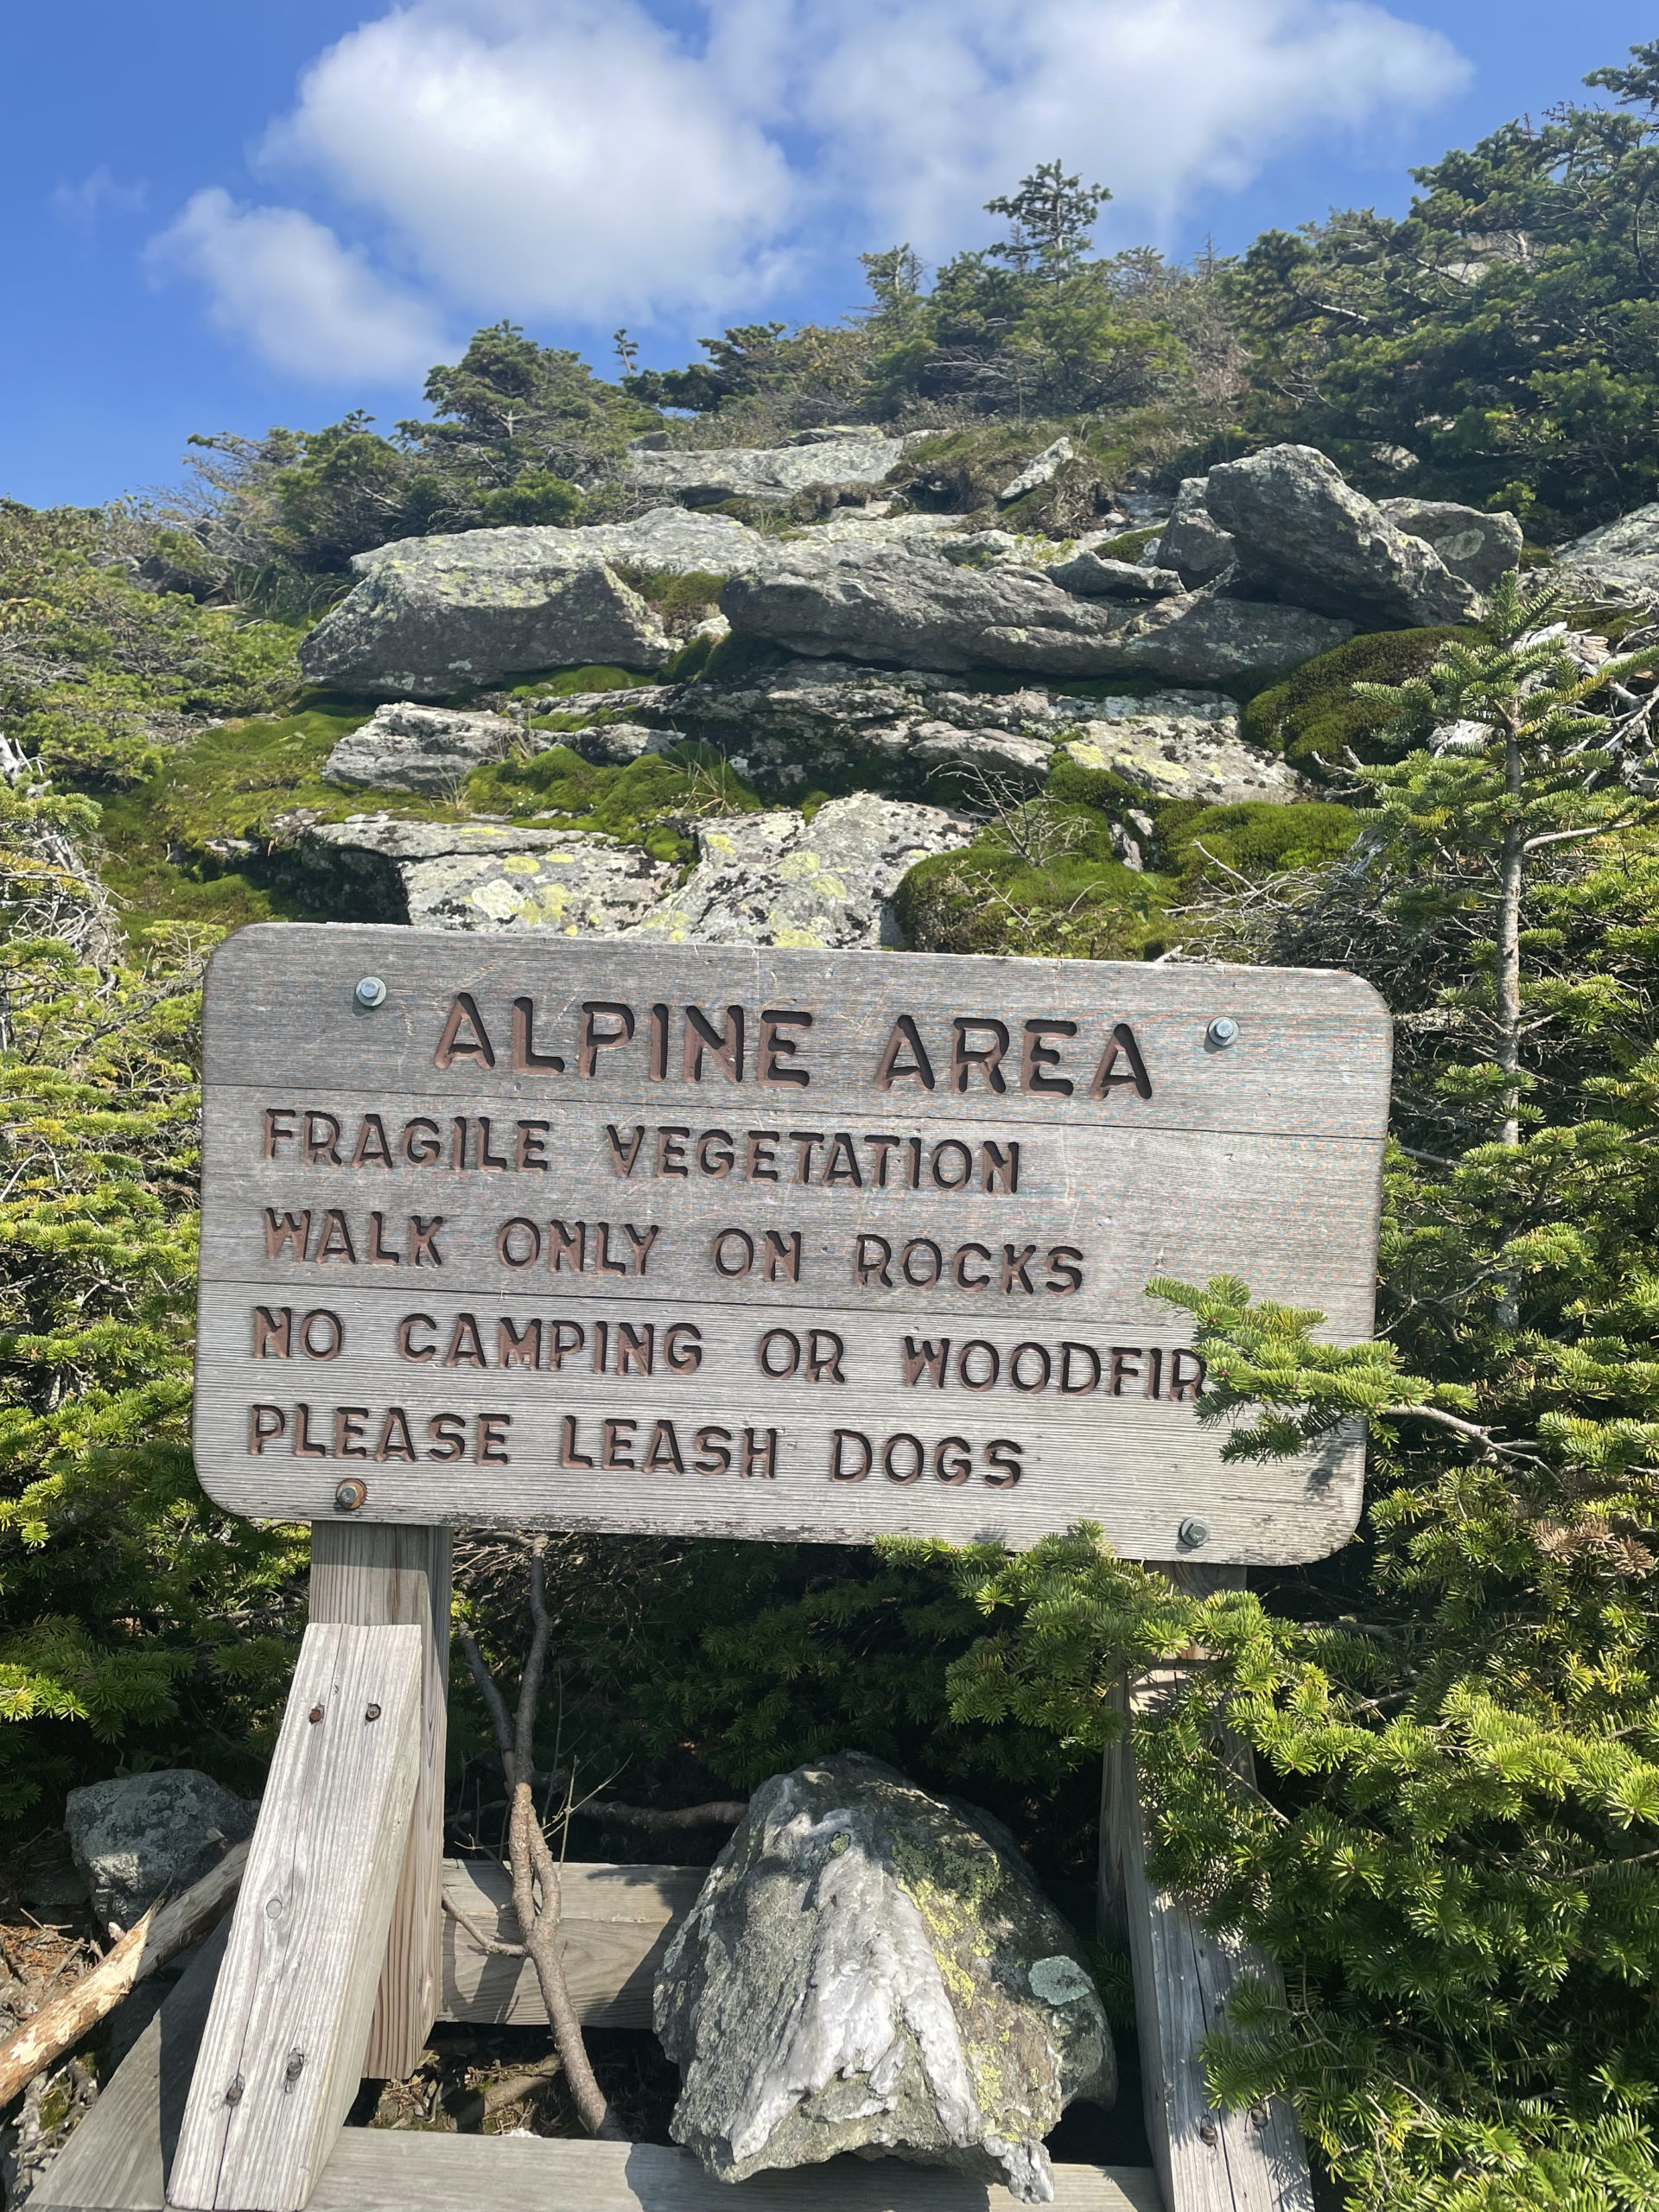 Alpine vegetation sign, seen while hiking Camel's Hump in the Green Mountains, Vermont